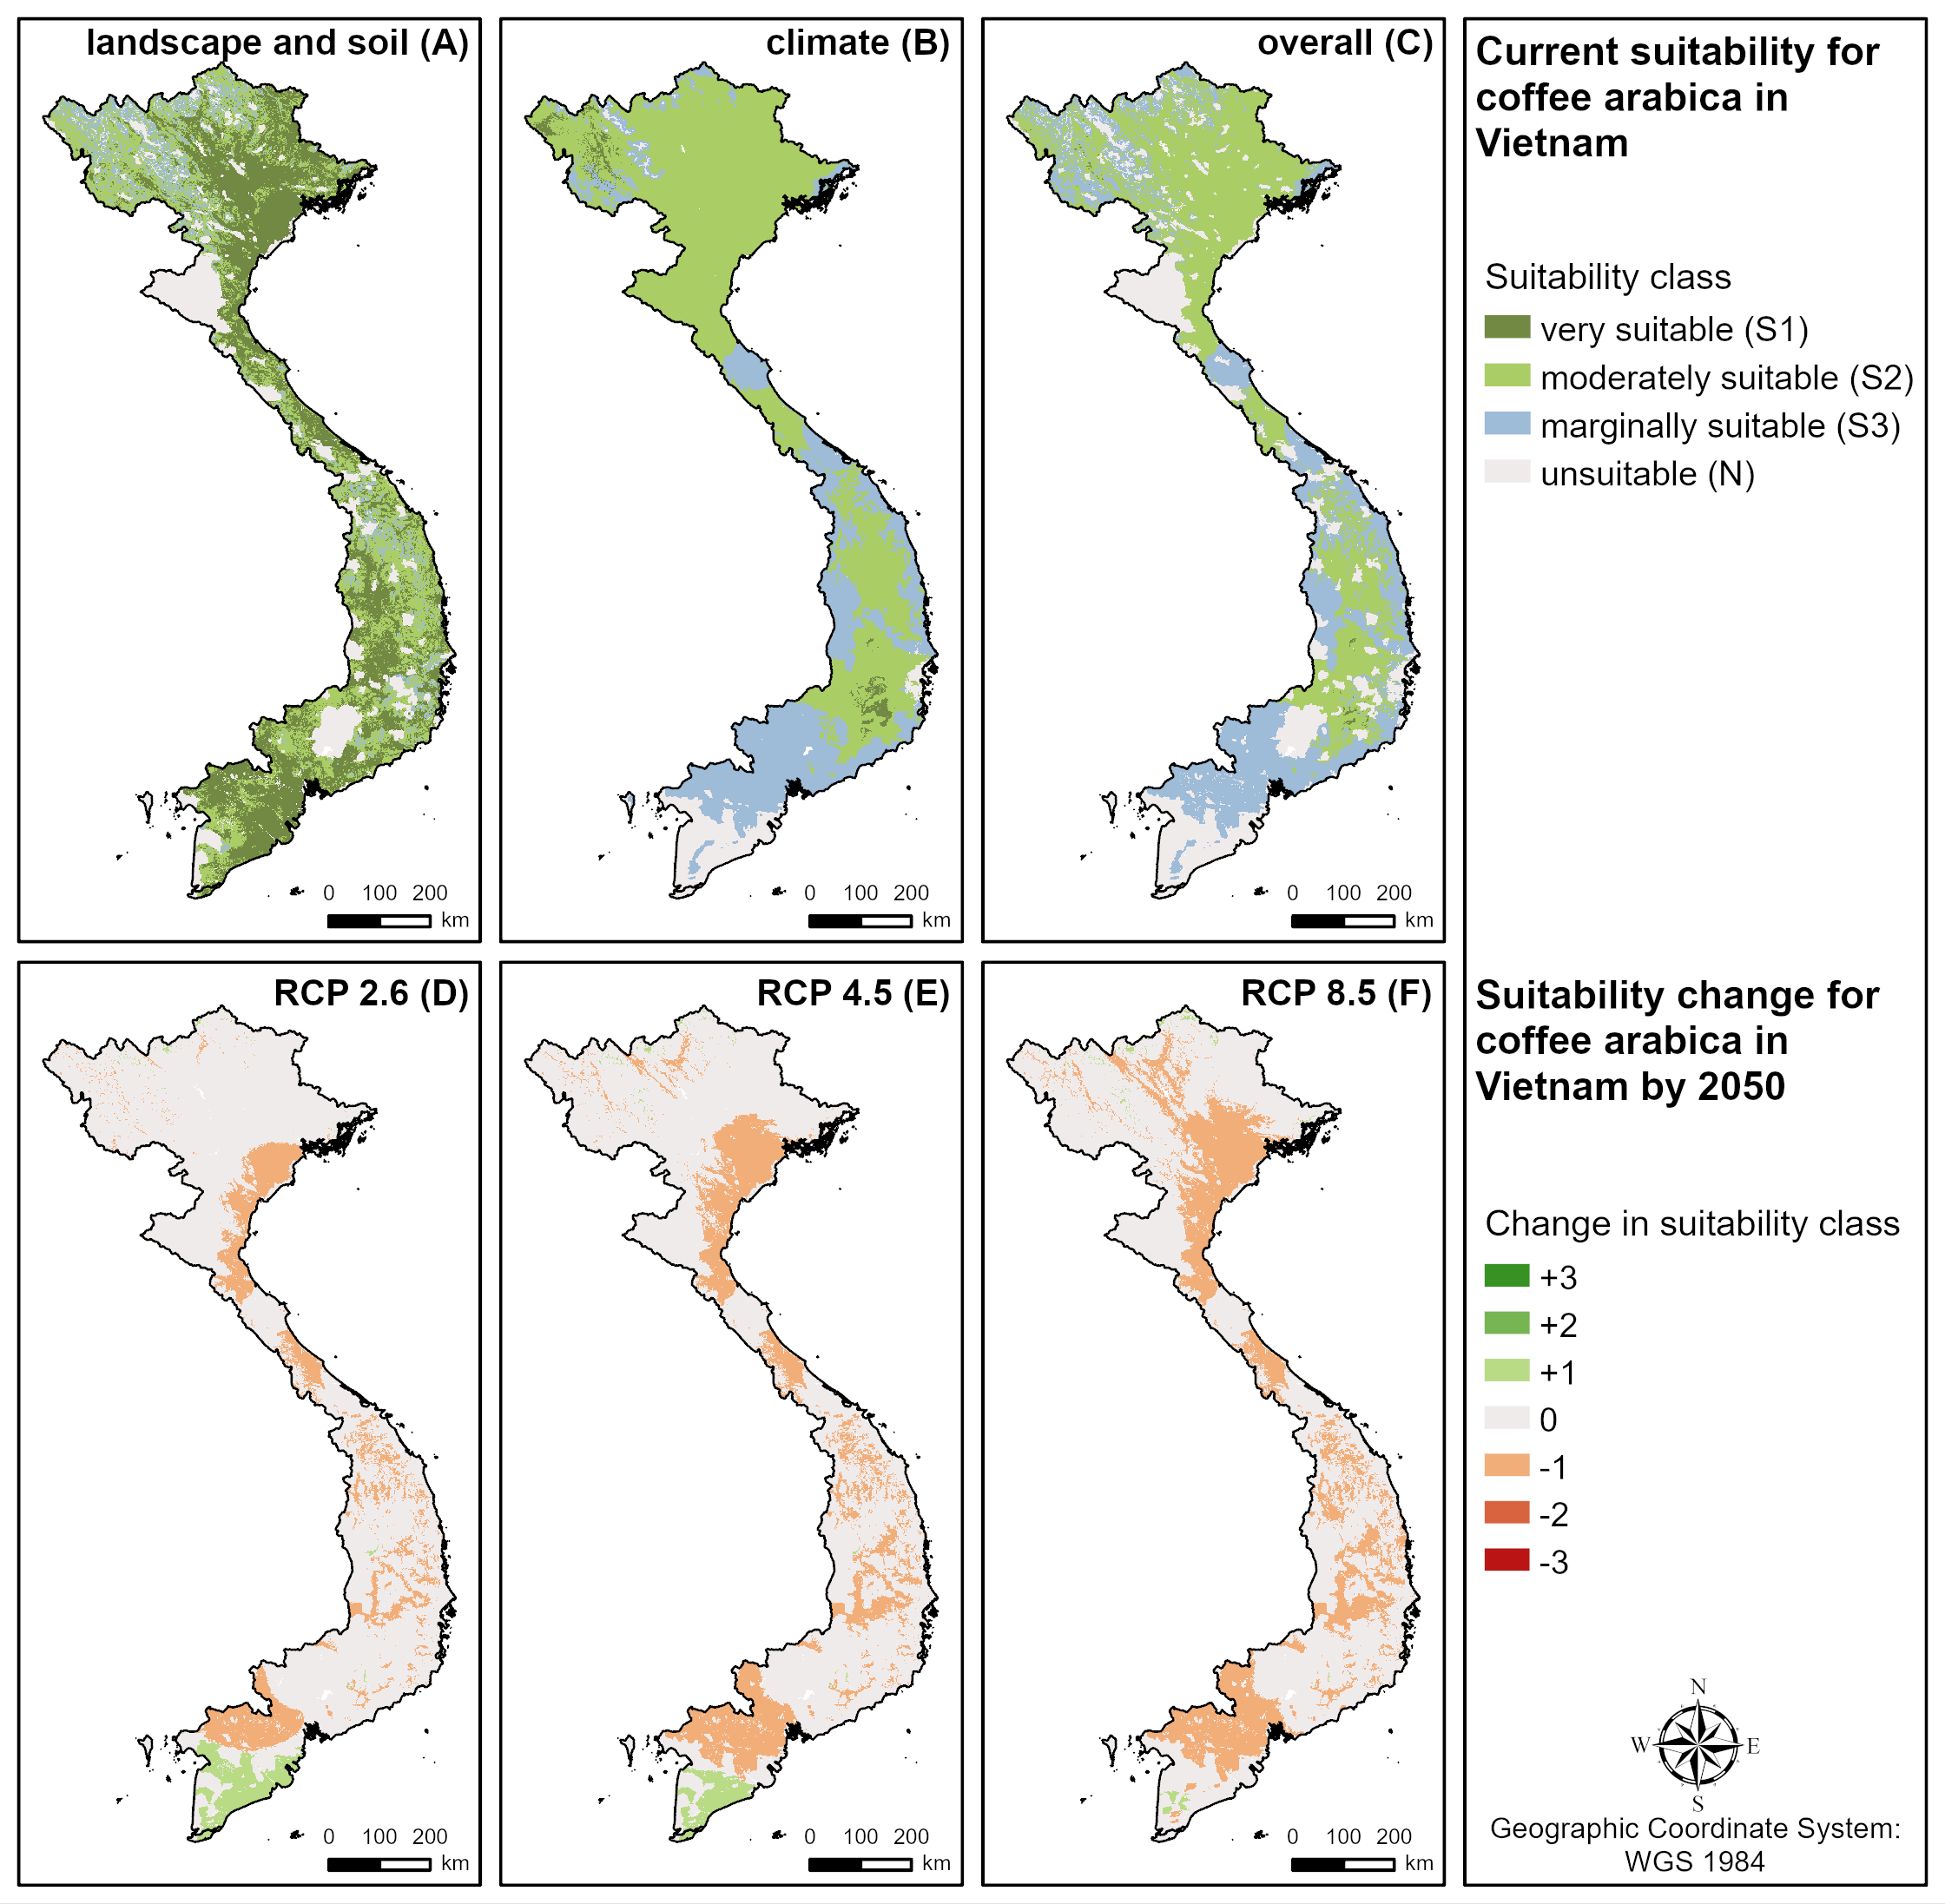 Map showing coffee growing areas of suitability in Vietnam under different climate scenarios between now and 2050